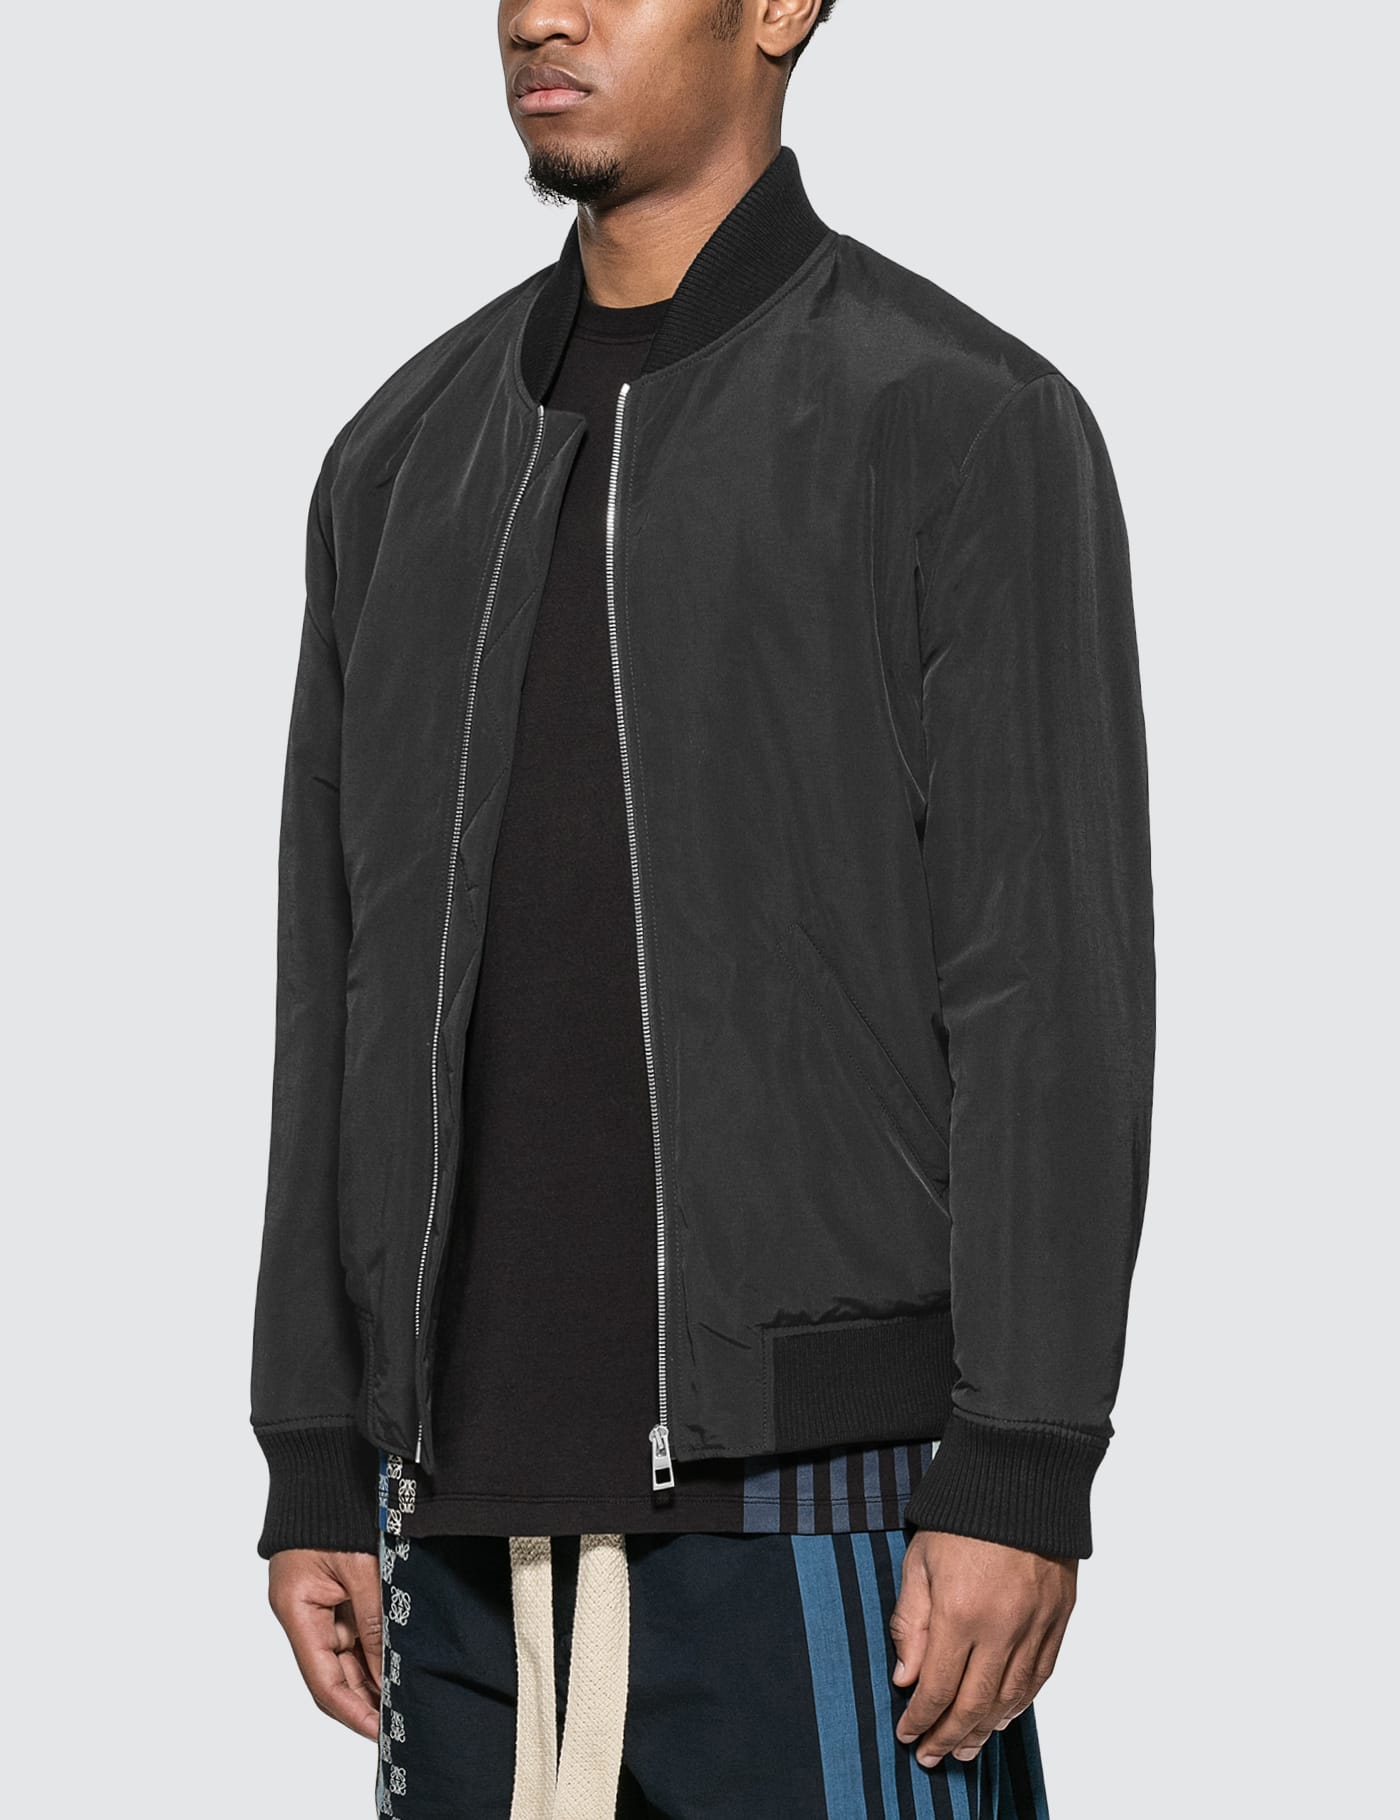 Loewe - Daisy Bomber Jacket | HBX - Globally Curated Fashion and 